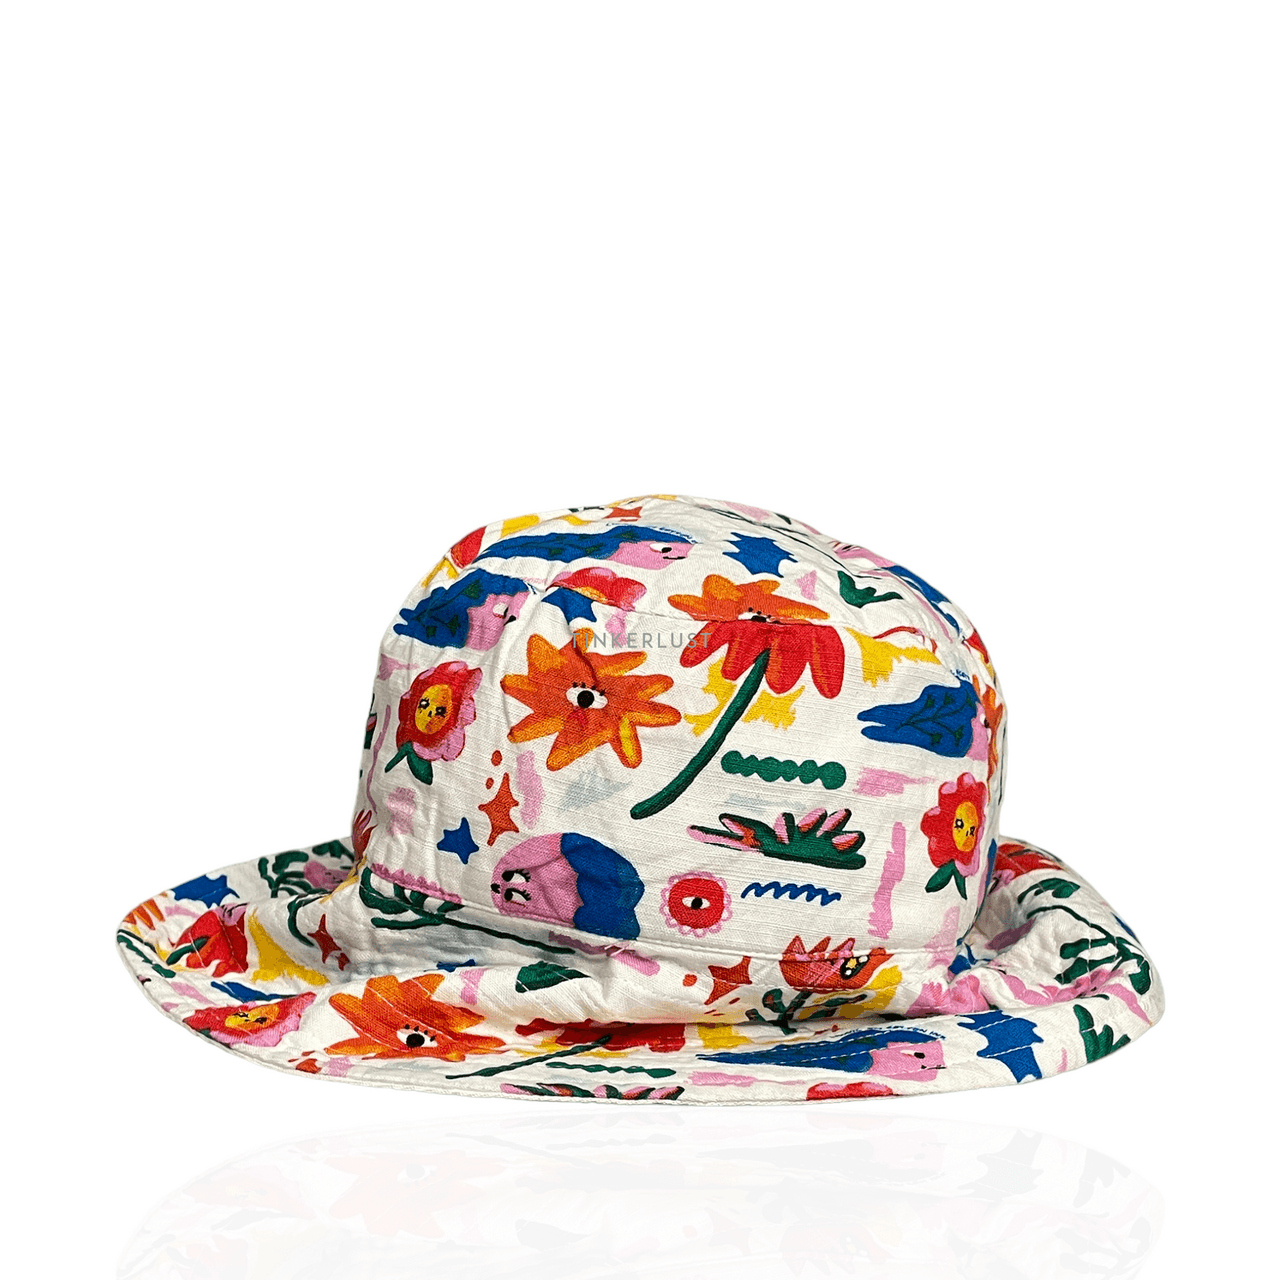 Liunic OnThings Multicolour Printed Hats